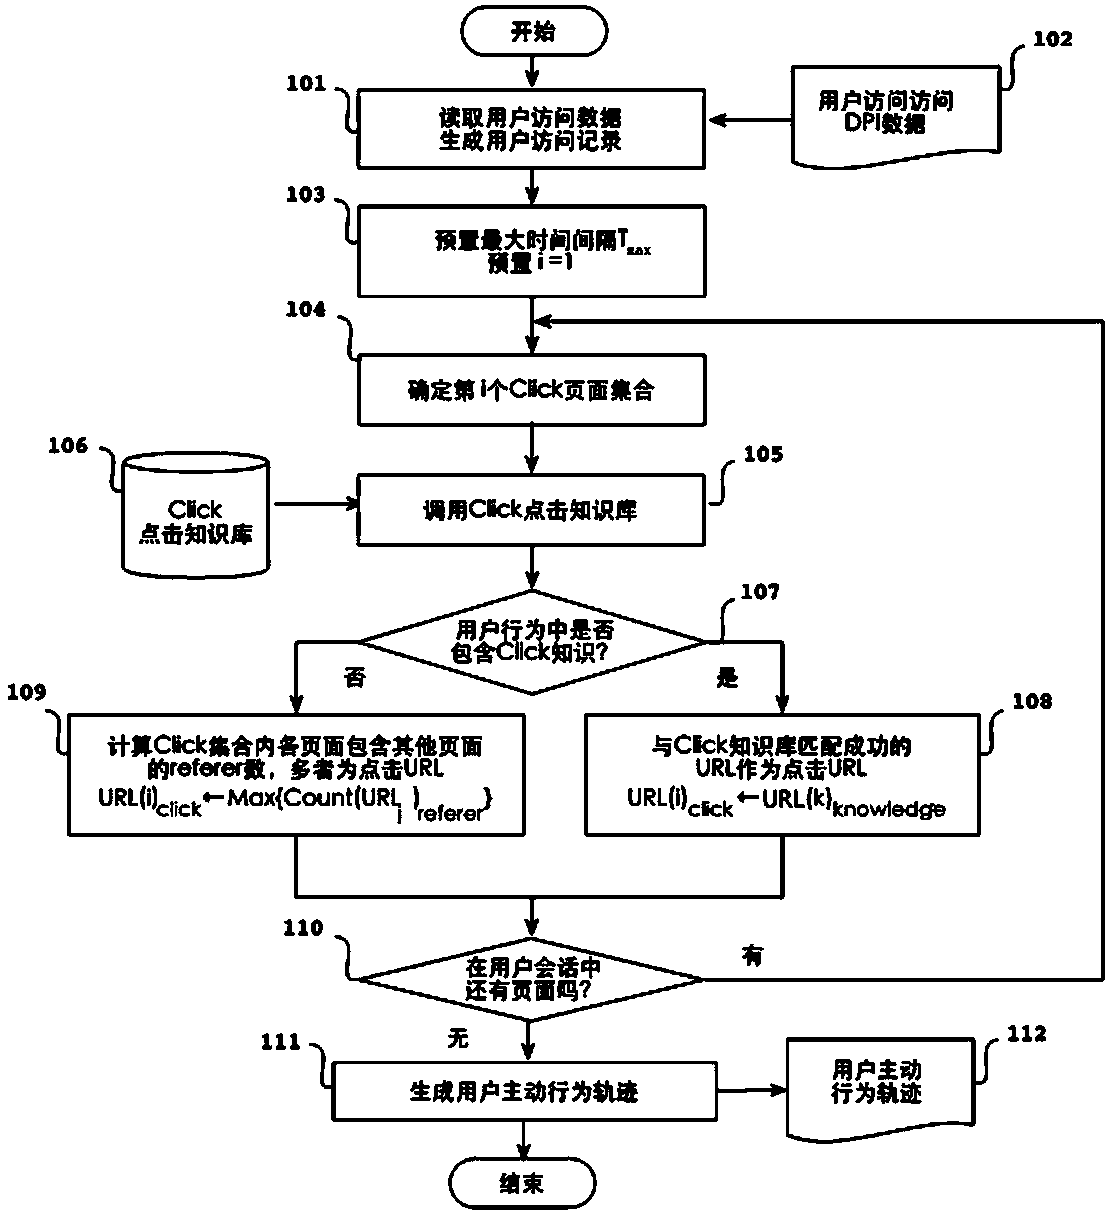 Method for analyzing active access behaviors of internet users